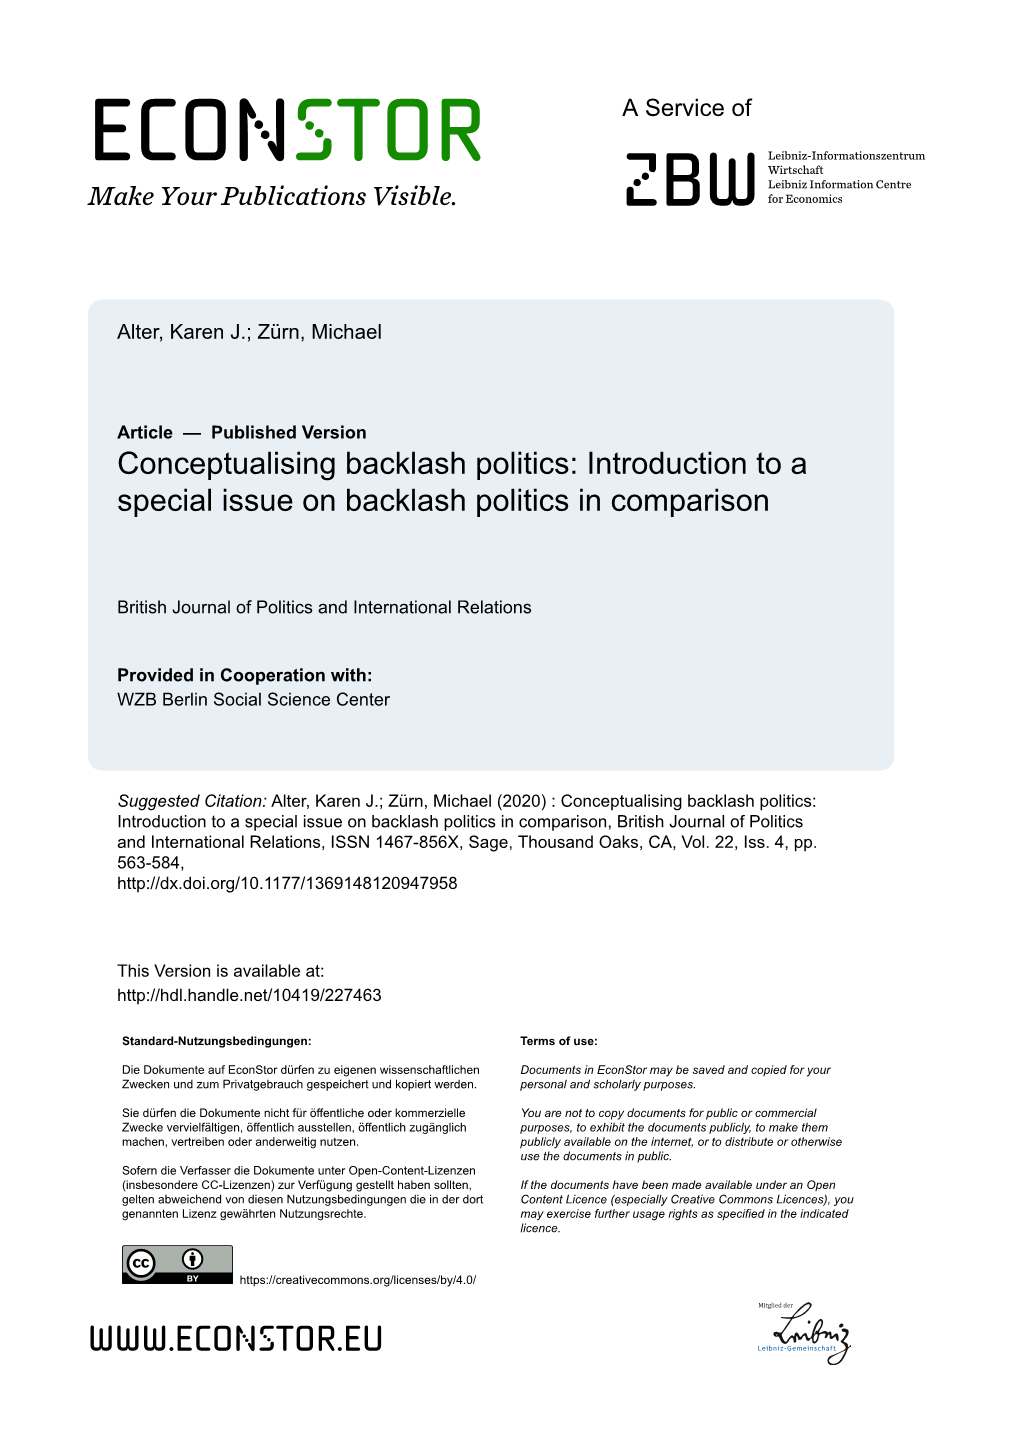 Conceptualising Backlash Politics: Introduction to a Special Issue on Backlash Politics in Comparison